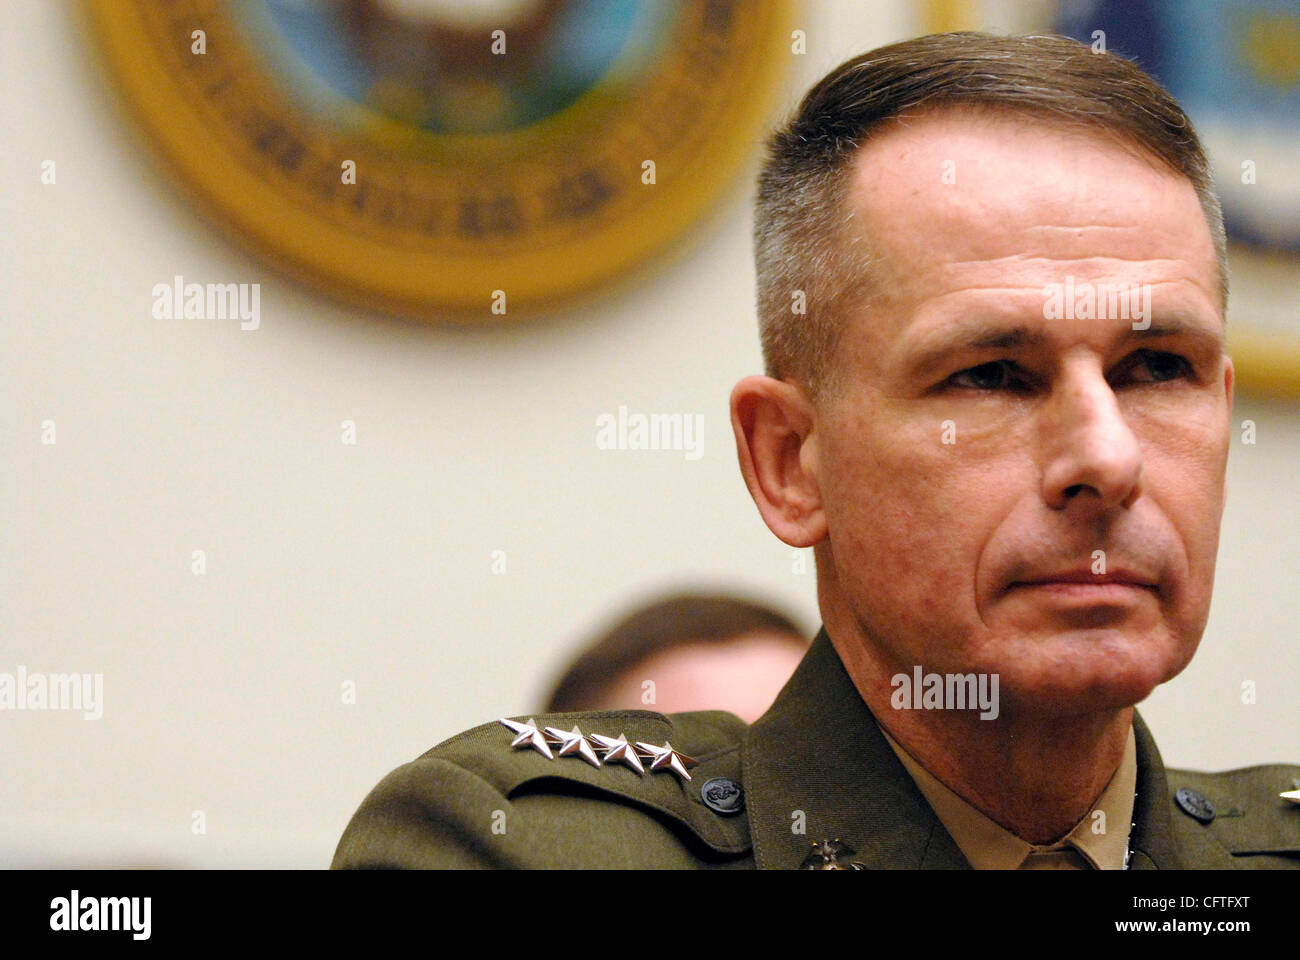 Jan 11, 2007; Washington, DC, USA; General PETER PACE answers questions from the House Armed Services Committee about President Bush's plan to send over 21,000 more troops to Iraq. Mandatory Credit: Photo by Mark Murrmann/ZUMA Press. (©) Copyright 2007 by Mark Murrmann Stock Photo